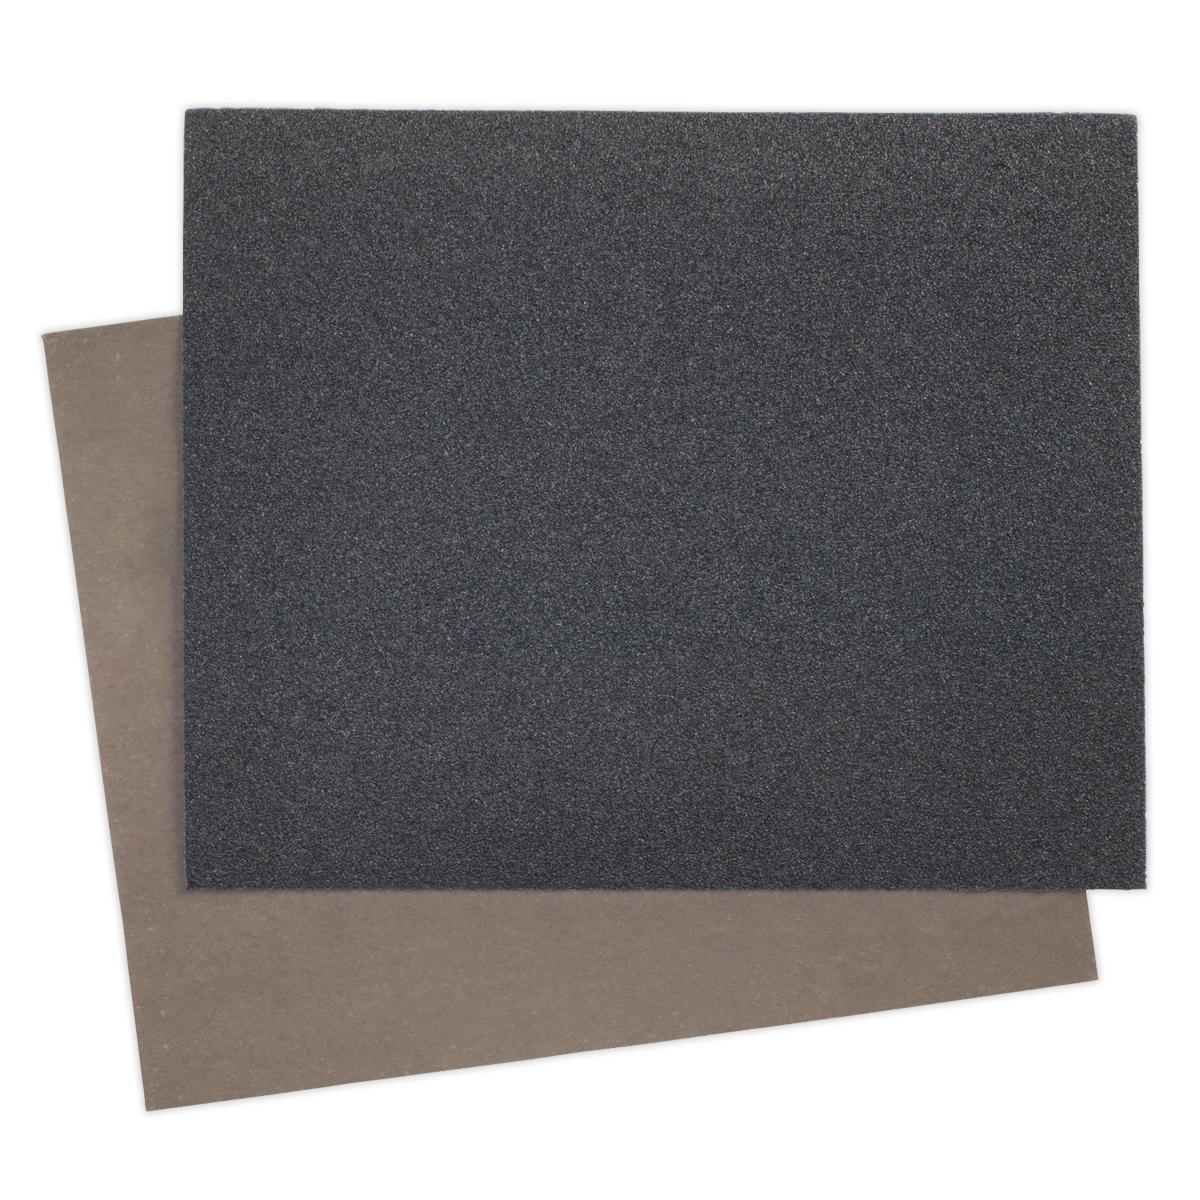 Sealey Wet & Dry Paper 230 x 280mm 180Grit Pack of 25